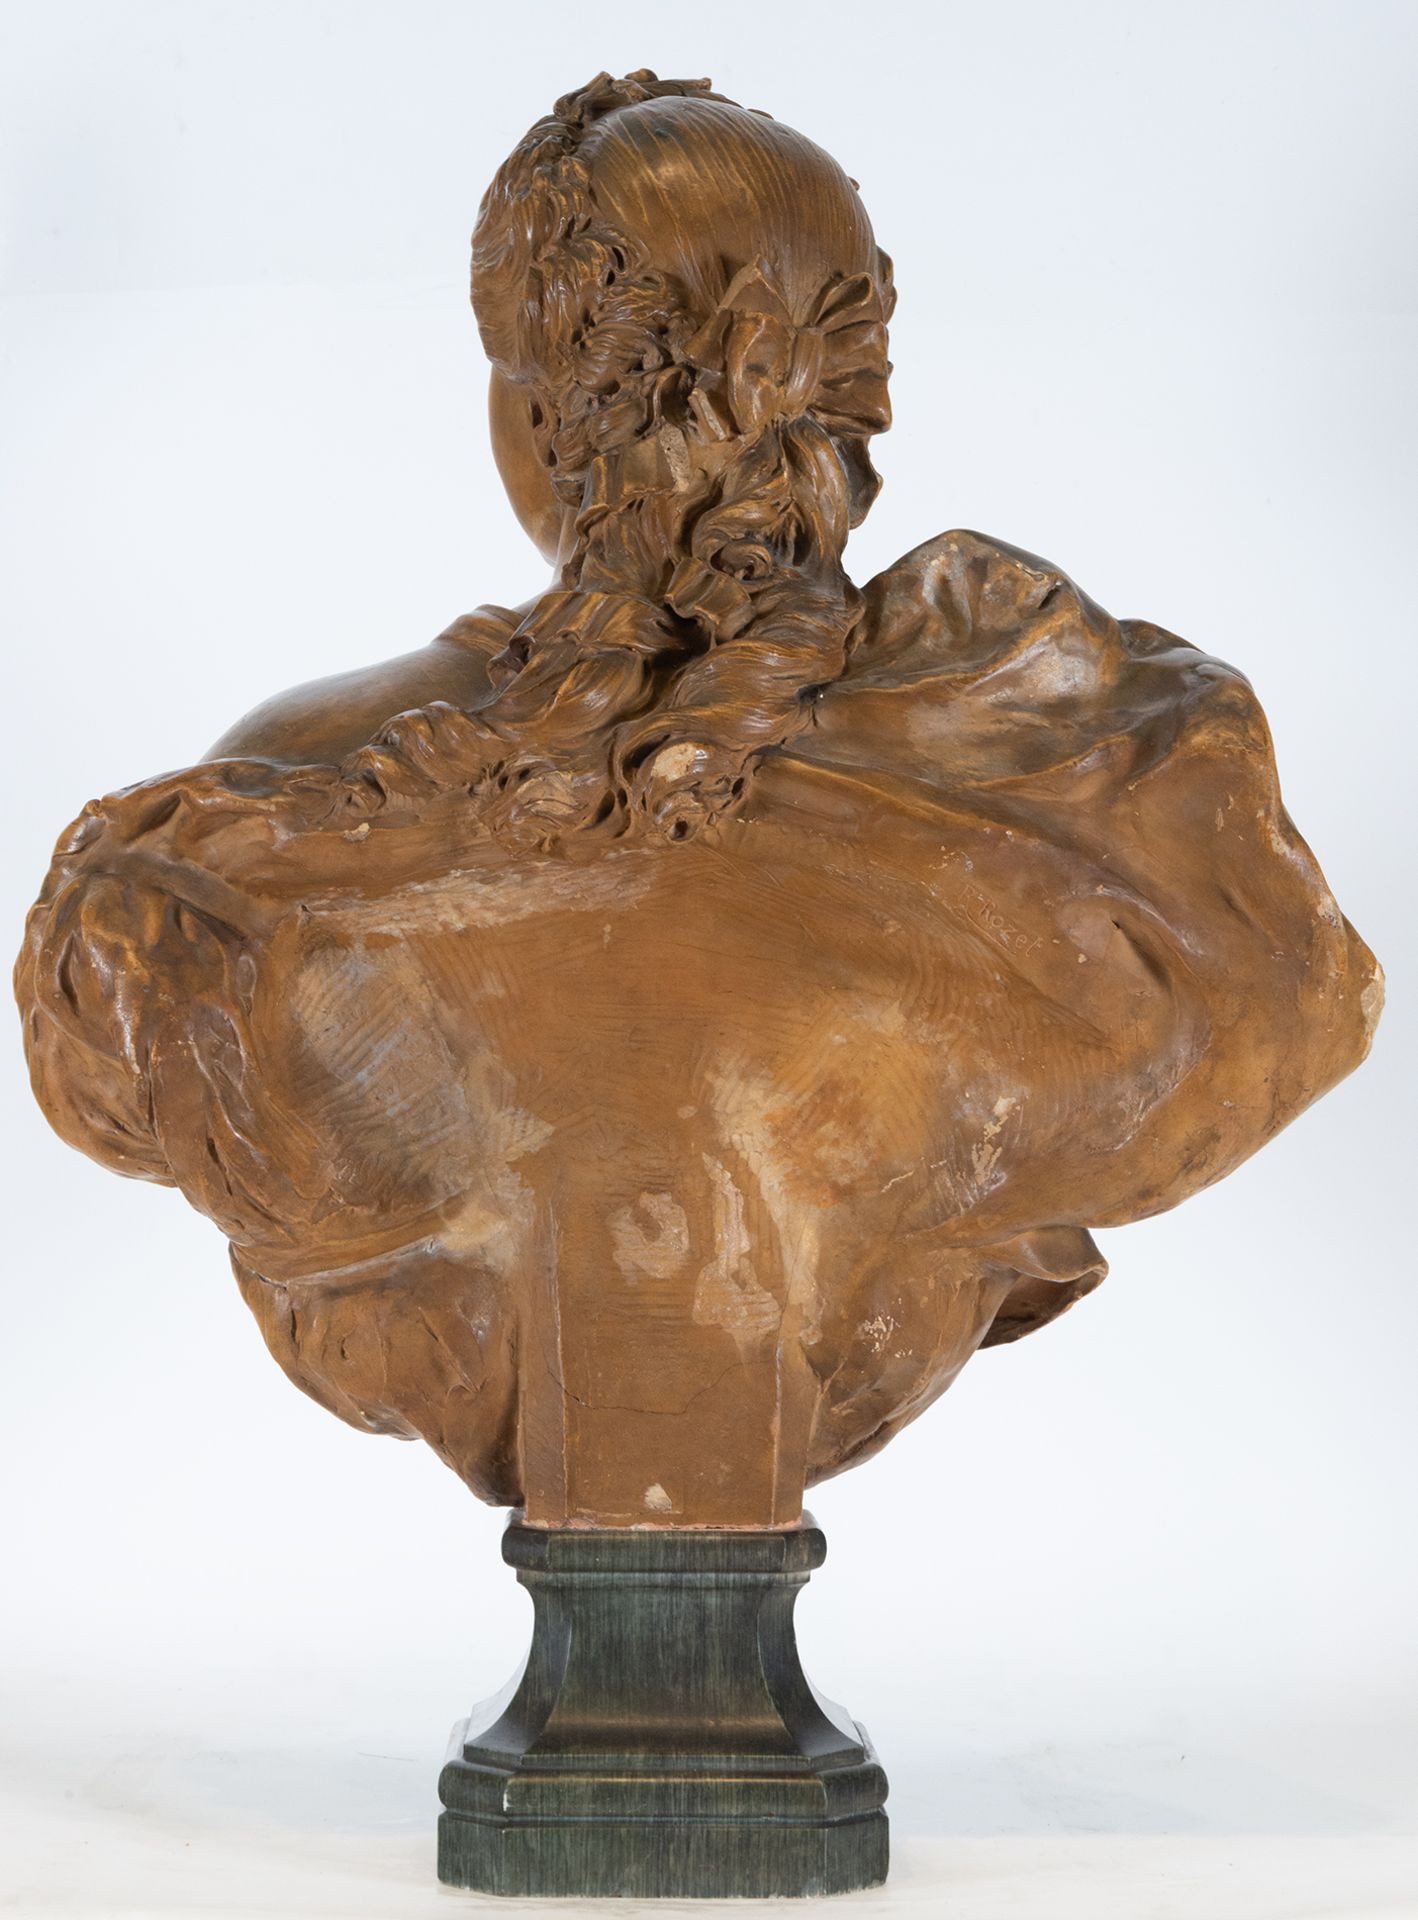 Large Bust of French Noble Lady in Terracotta, France, 18th century - Image 6 of 6